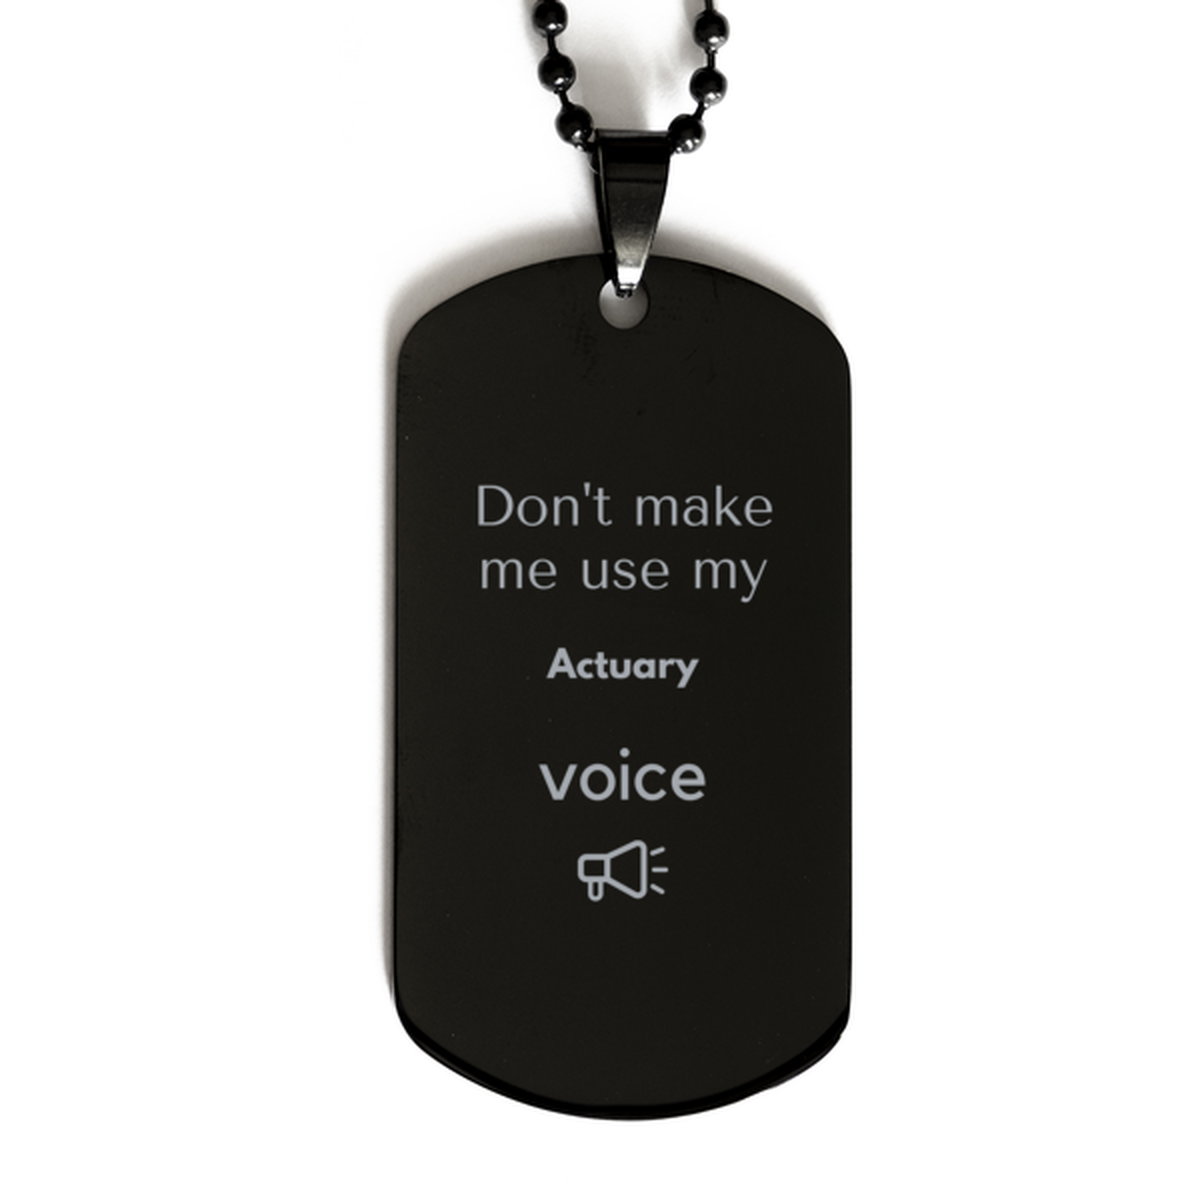 Don't make me use my Actuary voice, Sarcasm Actuary Gifts, Christmas Actuary Black Dog Tag Birthday Unique Gifts For Actuary Coworkers, Men, Women, Colleague, Friends